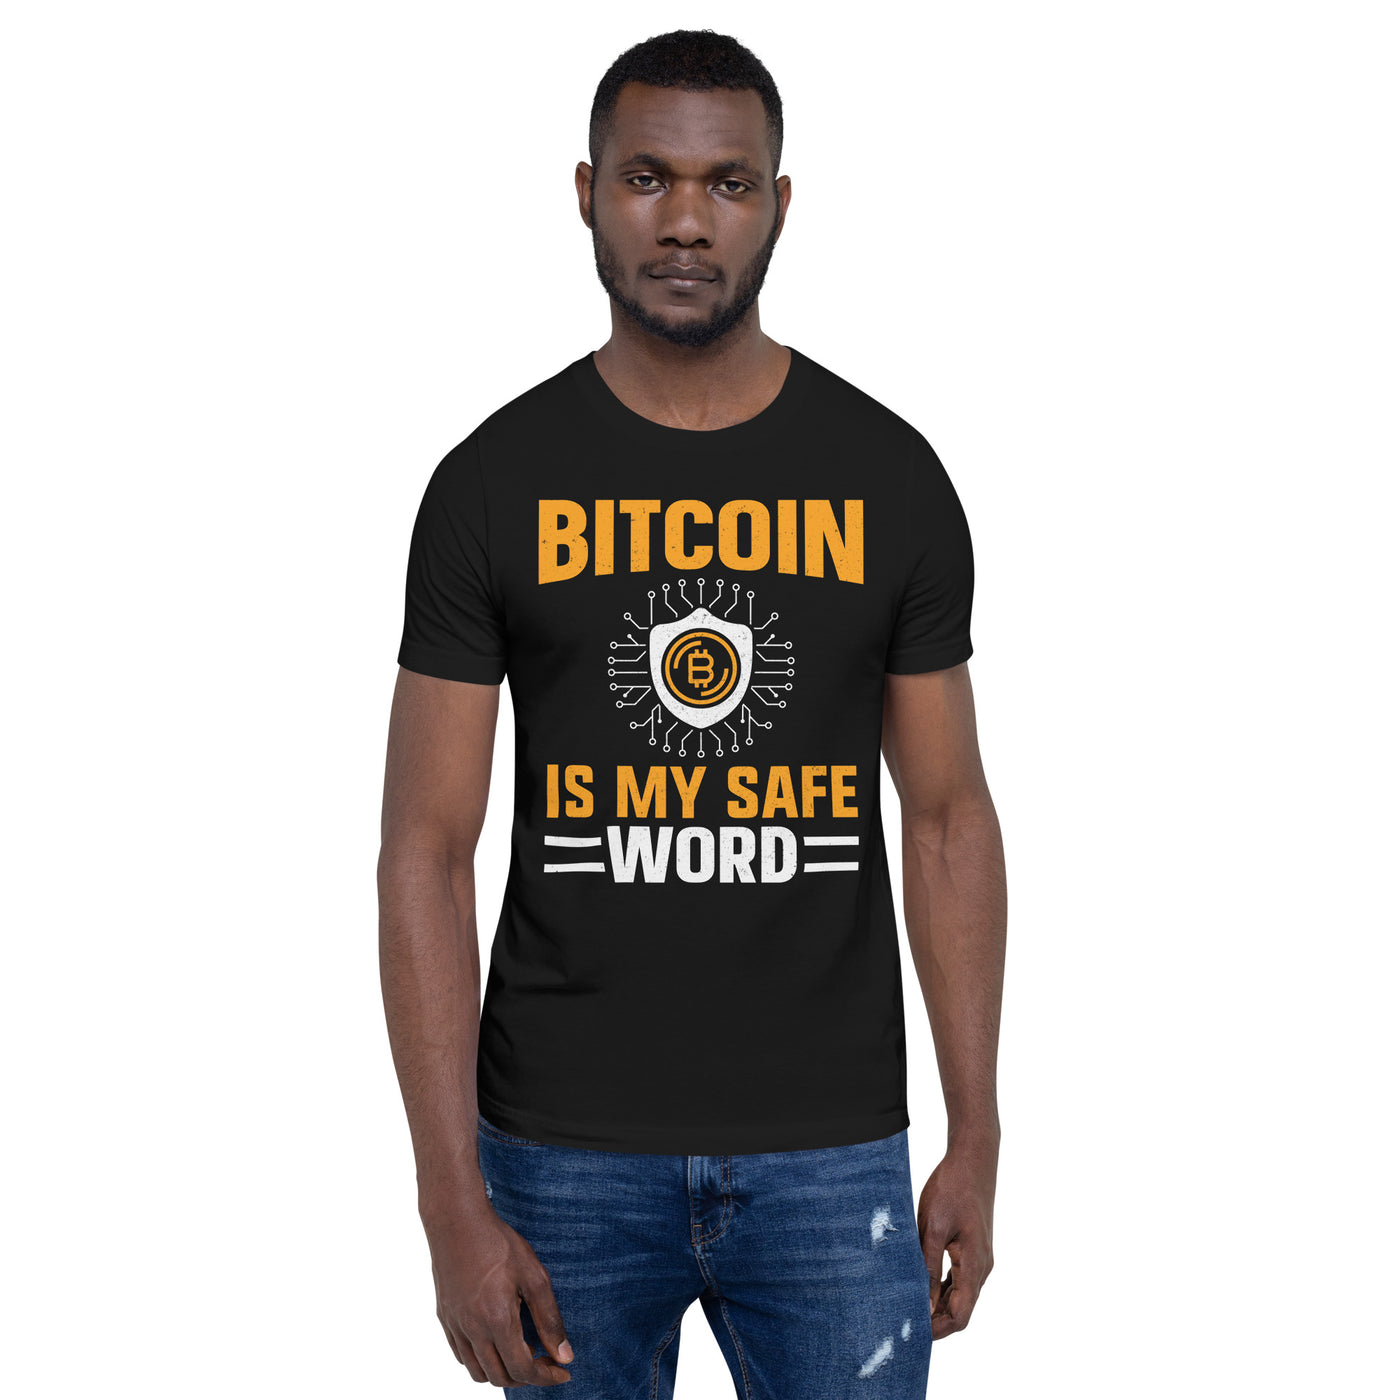 Bitcoin is My Safe Word - Unisex t-shirt